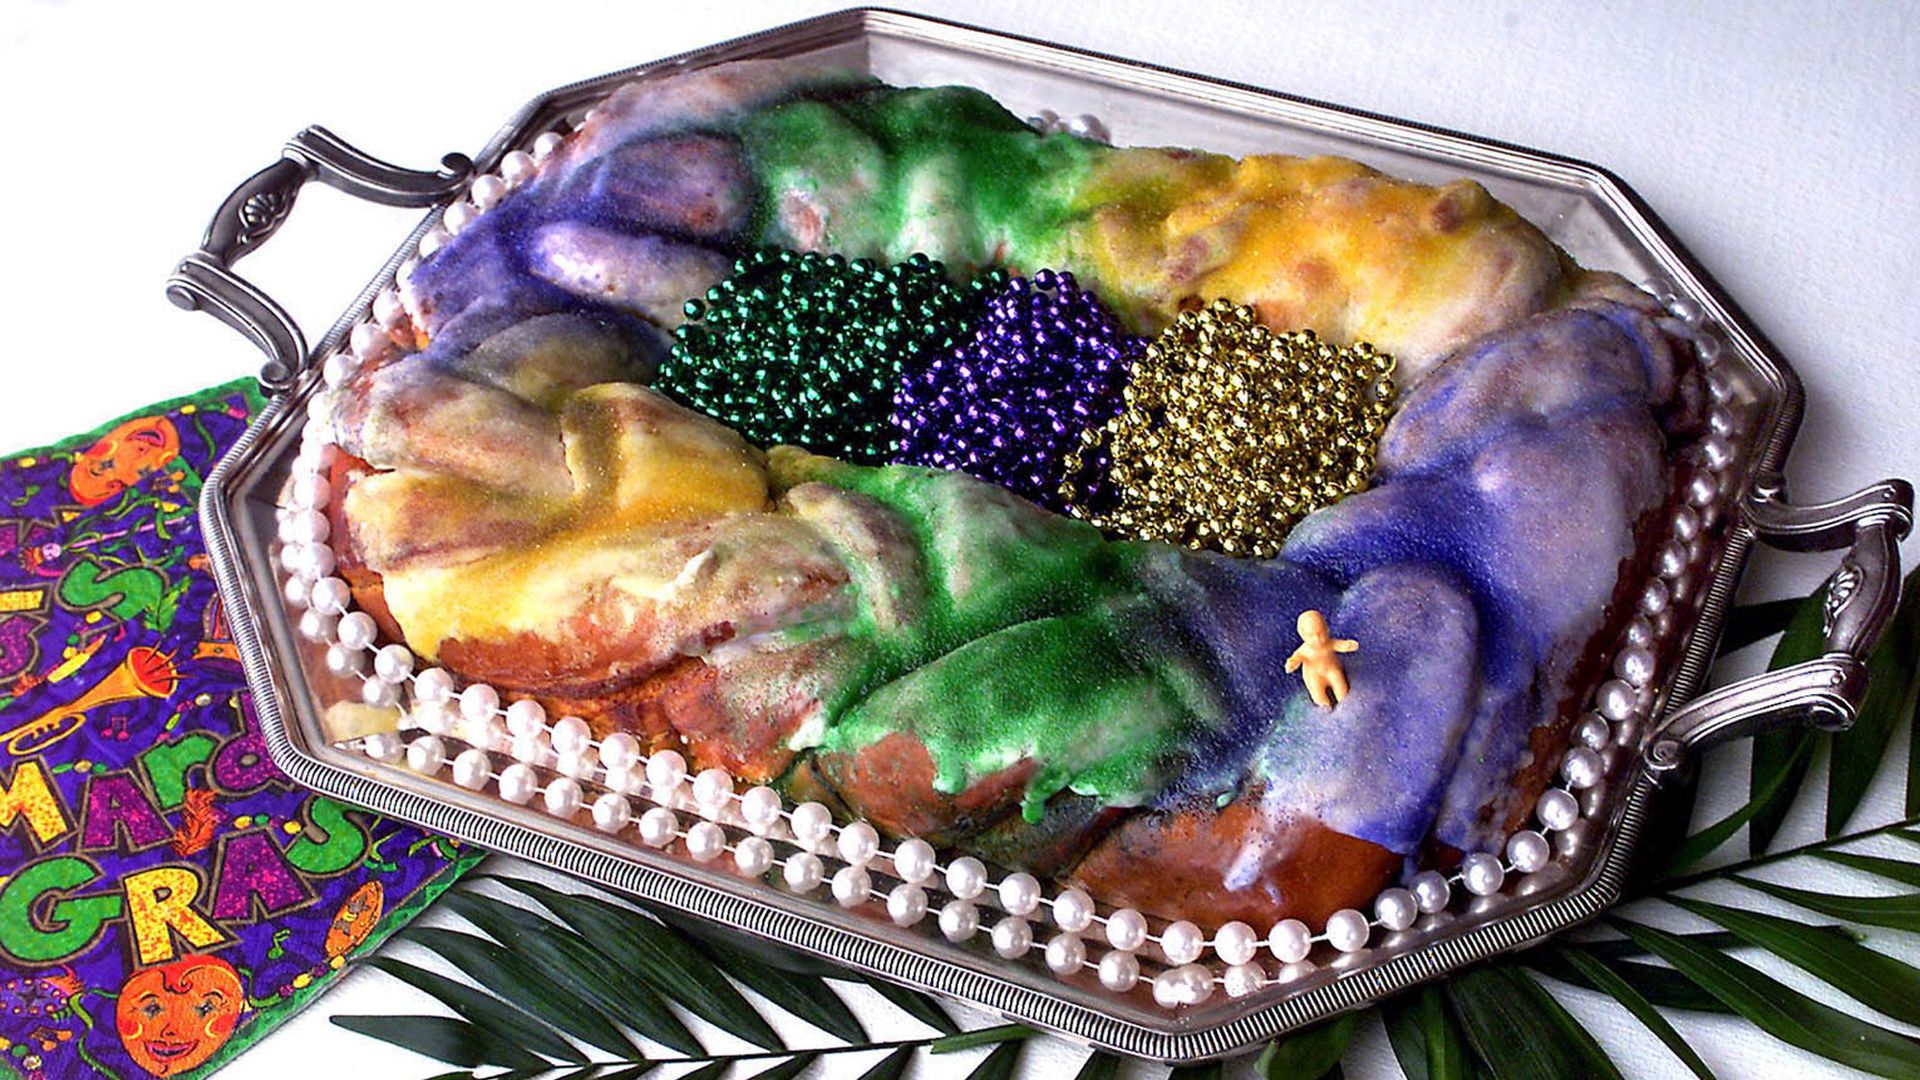 A traditional New Orleans king cake. Photo: Charles Curtis/Tribune News Service via Getty Images